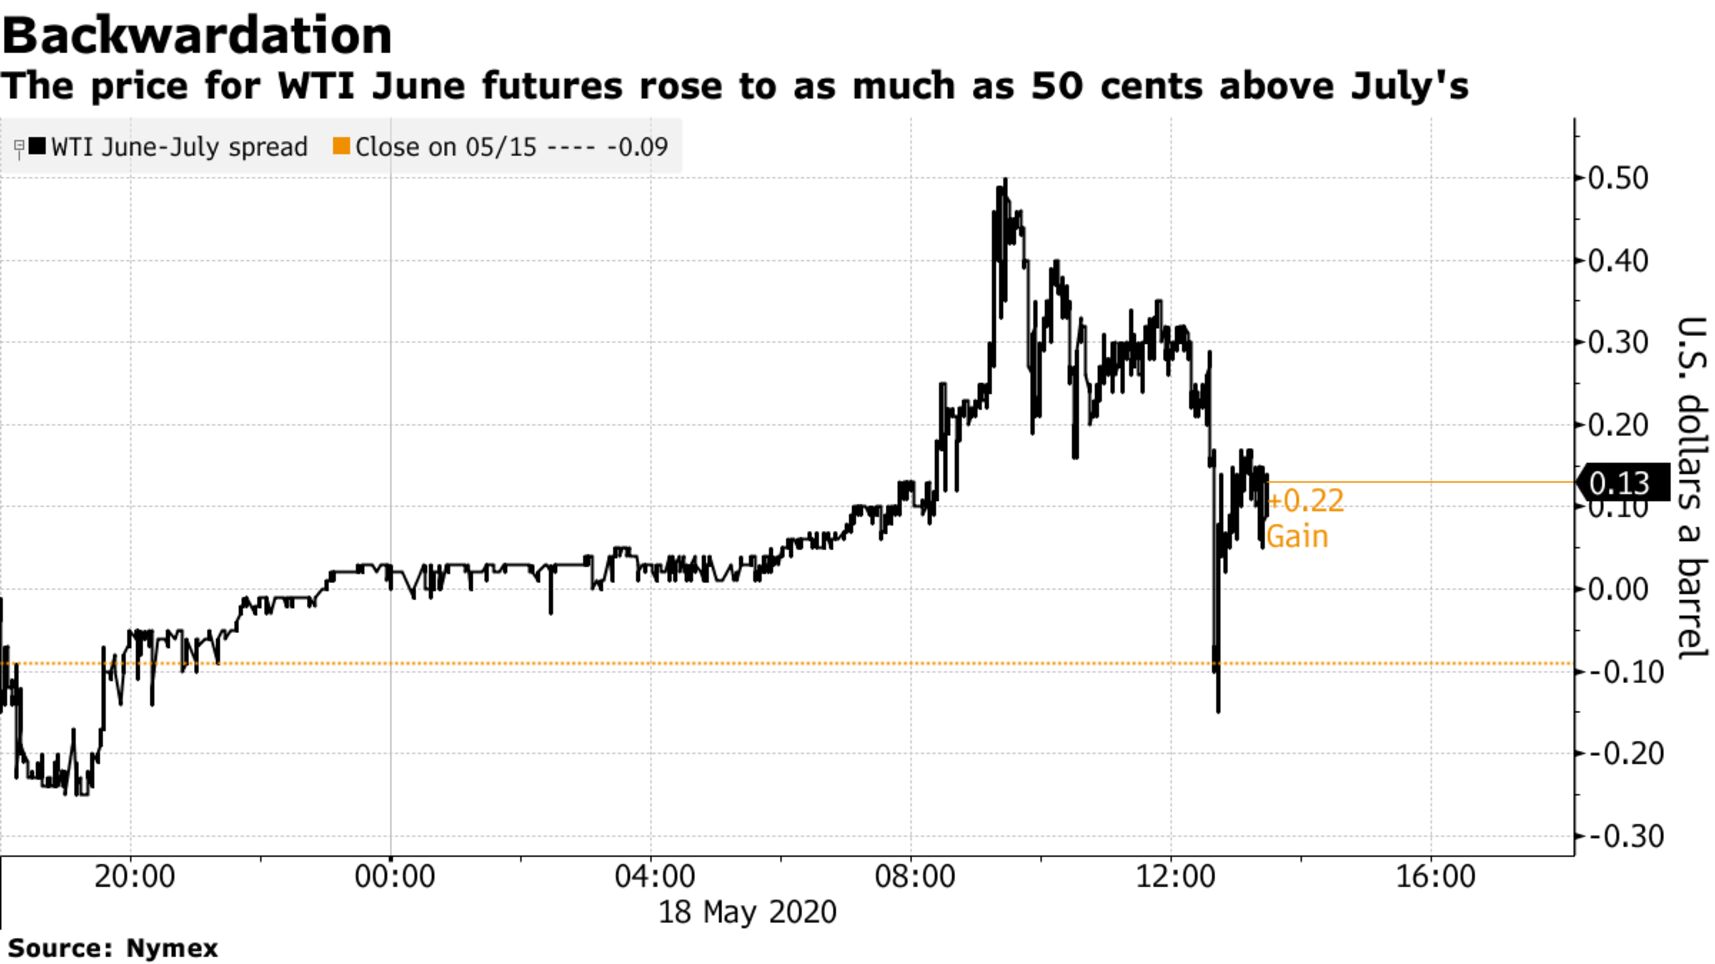 The price for WTI June futures rose to as much as 50 cents above July's